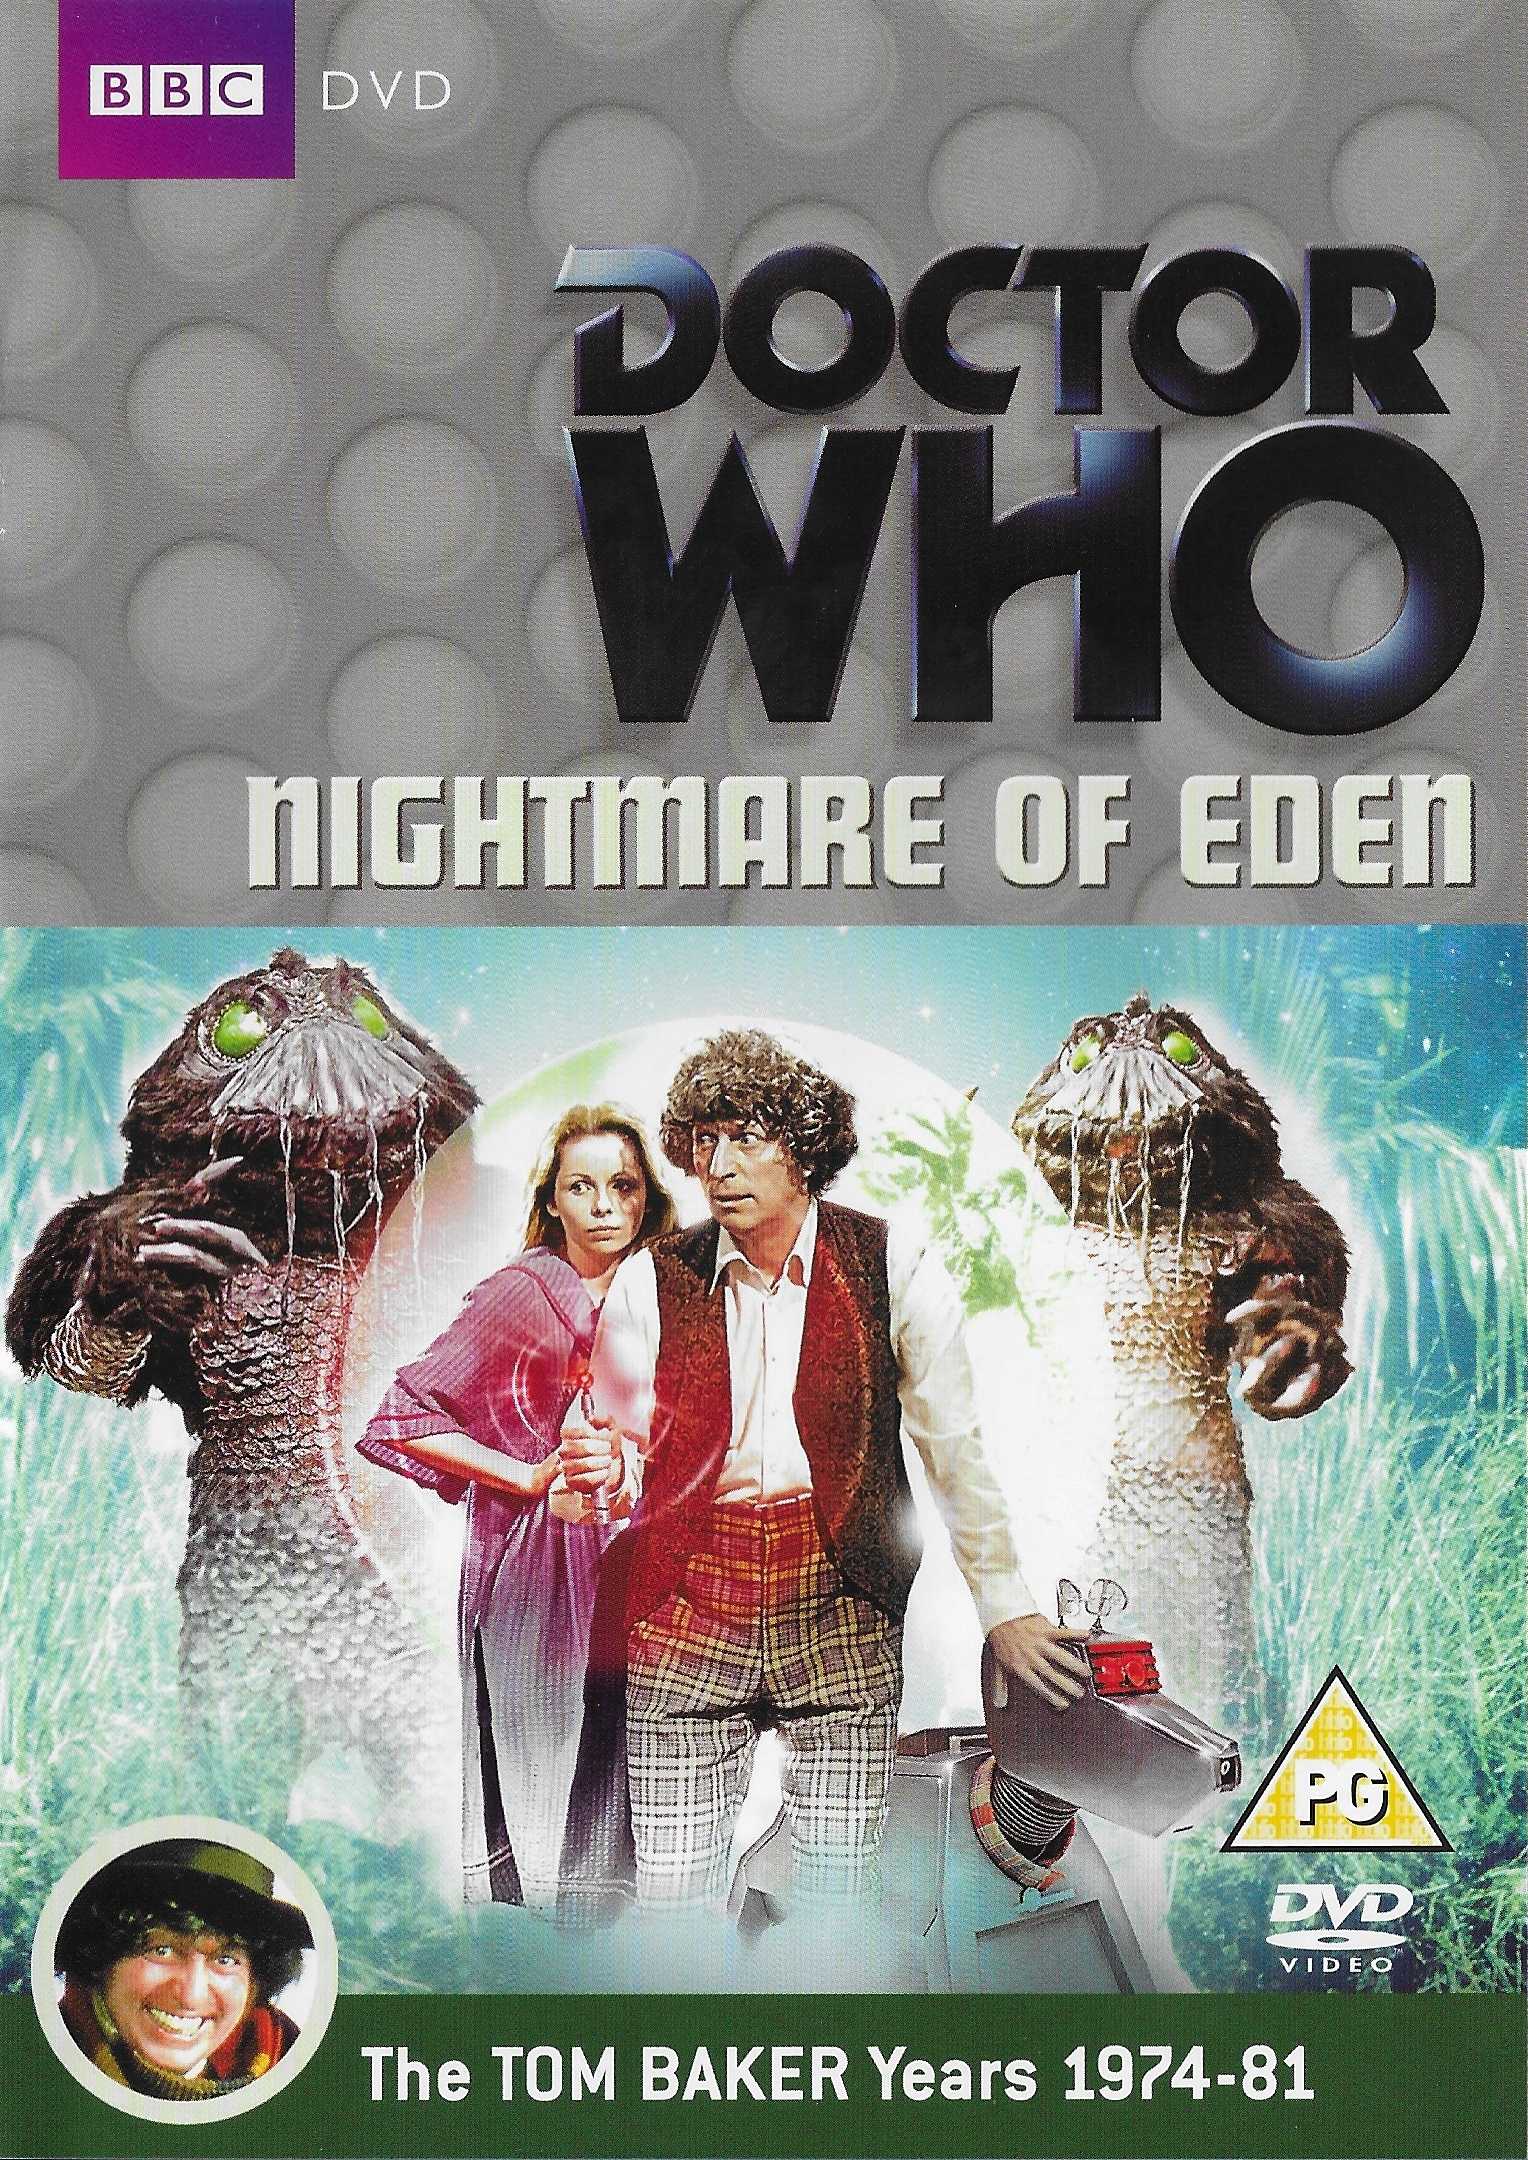 Picture of BBCDVD 3378 Doctor Who - Nightmare of Eden by artist Bob Baker from the BBC records and Tapes library